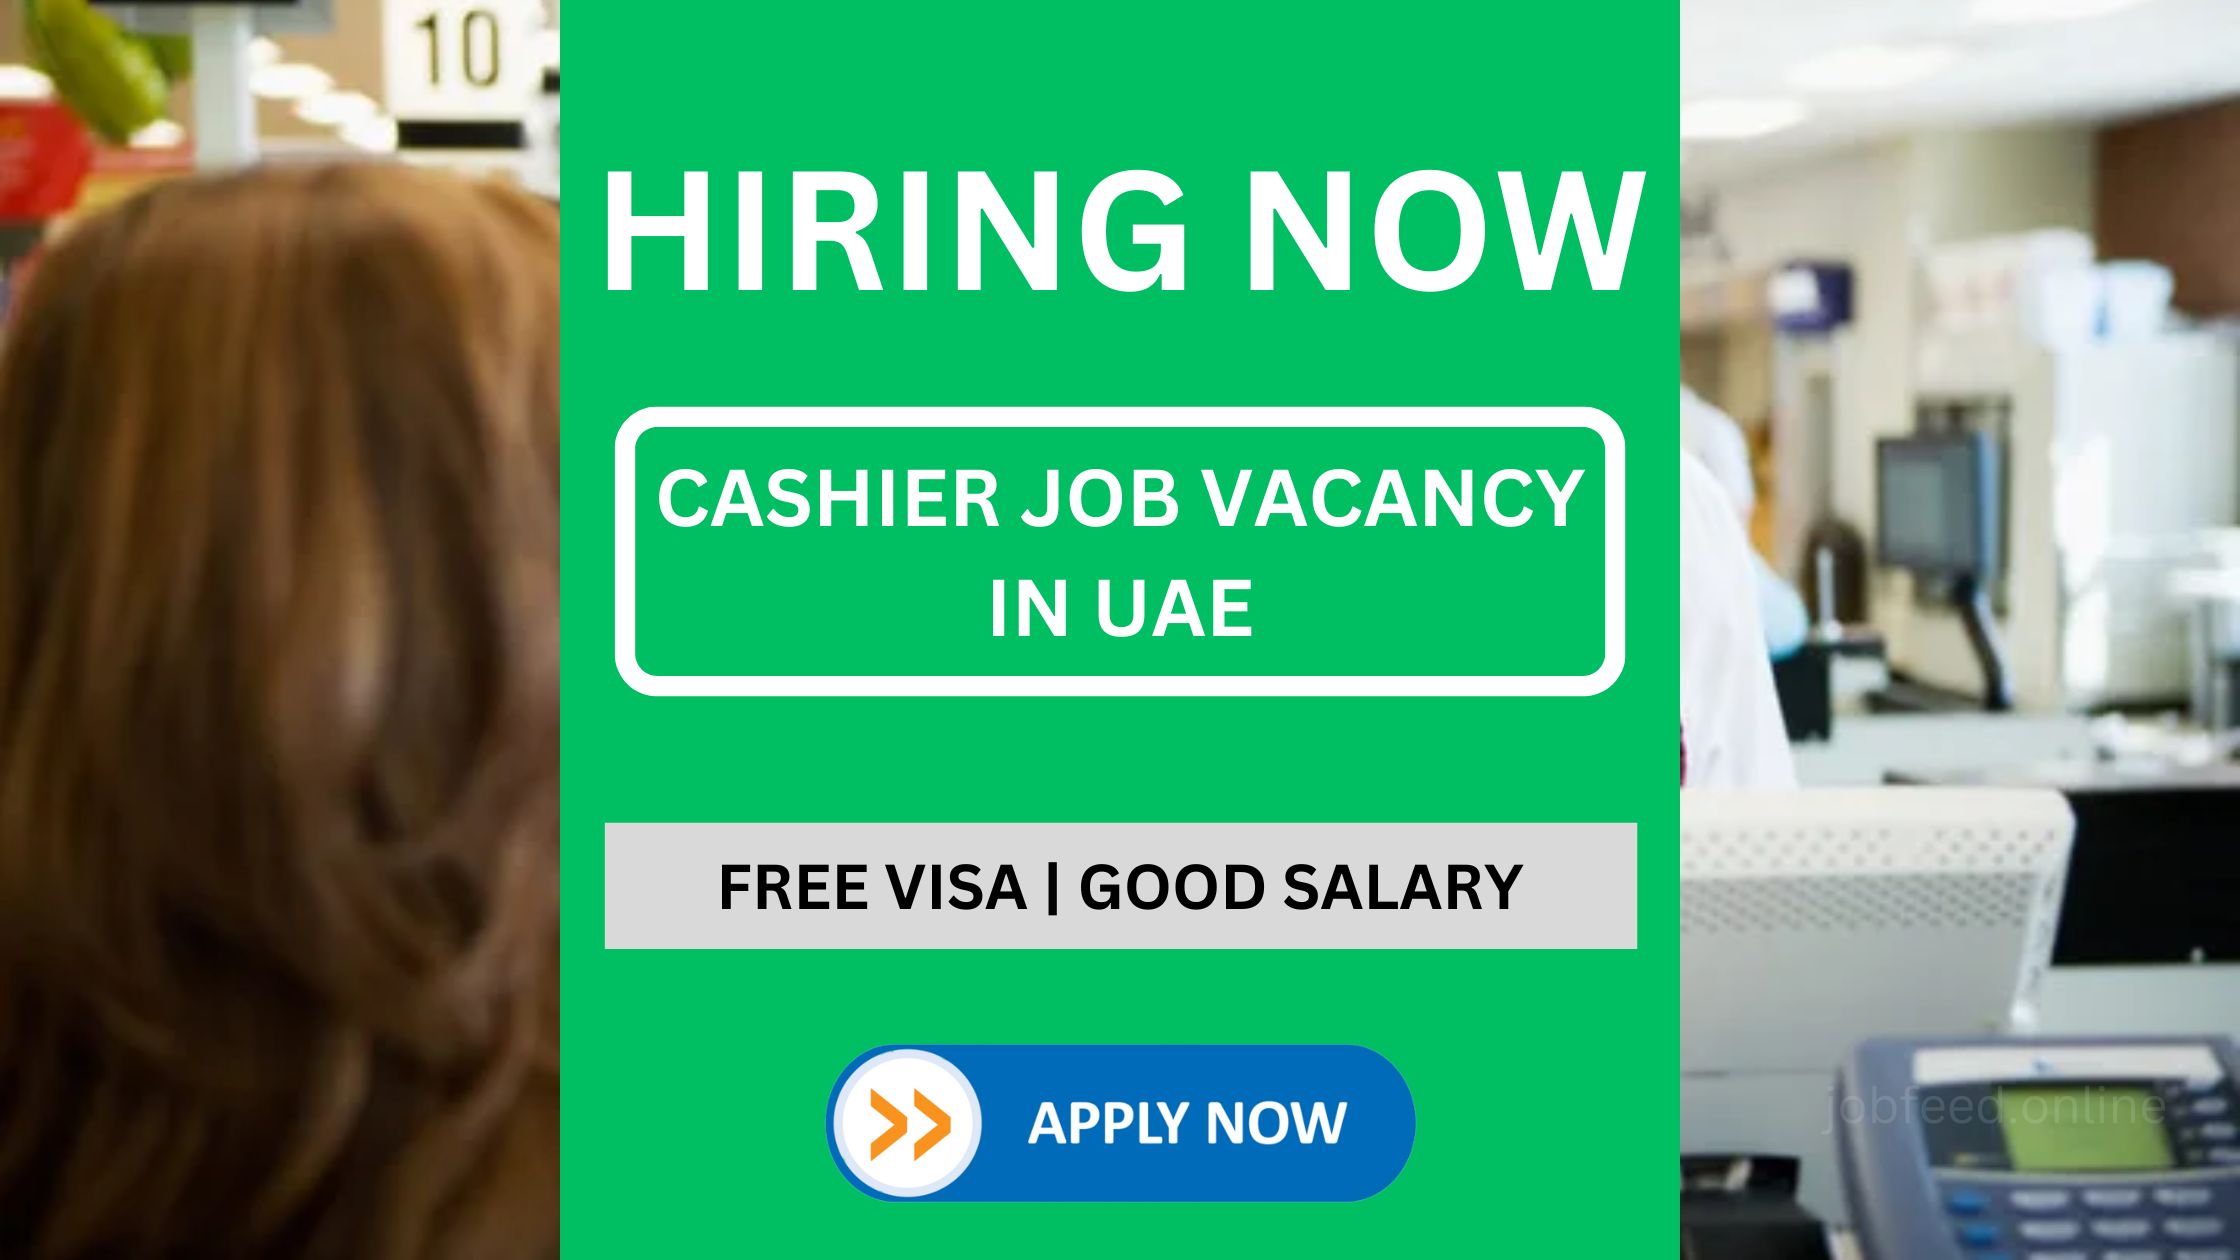 Home Bakery in Sharjah is Now Hiring Cashiers